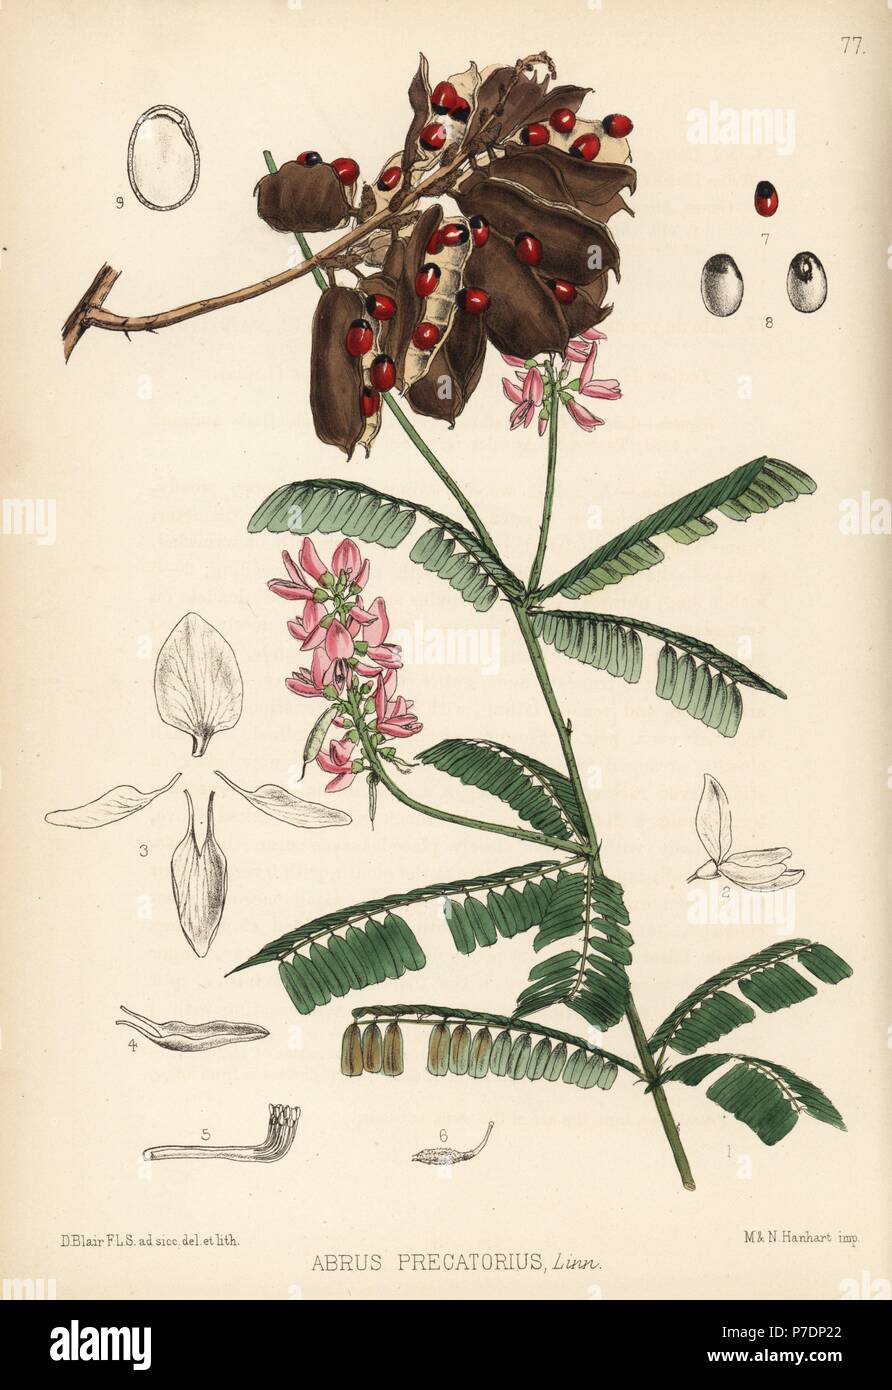 Indian liquorice or gunja, Abrus precatorius. Handcoloured lithograph by Hanhart after a botanical illustration by David Blair from Robert Bentley and Henry Trimen's Medicinal Plants, London, 1880. Stock Photo